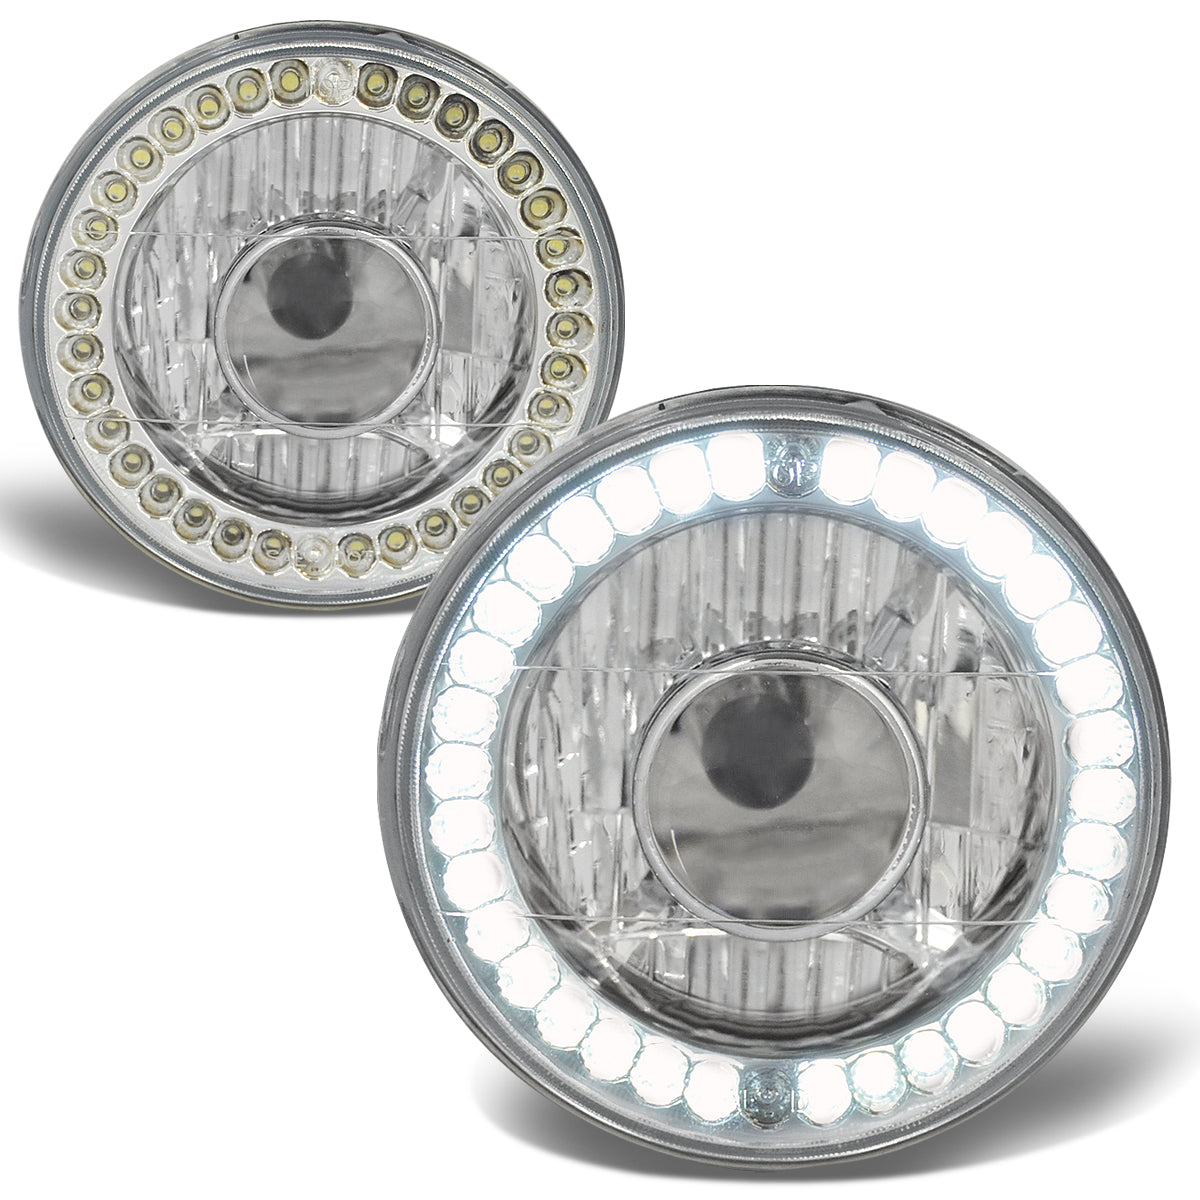 7x7 in. Round LED Halo Ring Projector Headlights